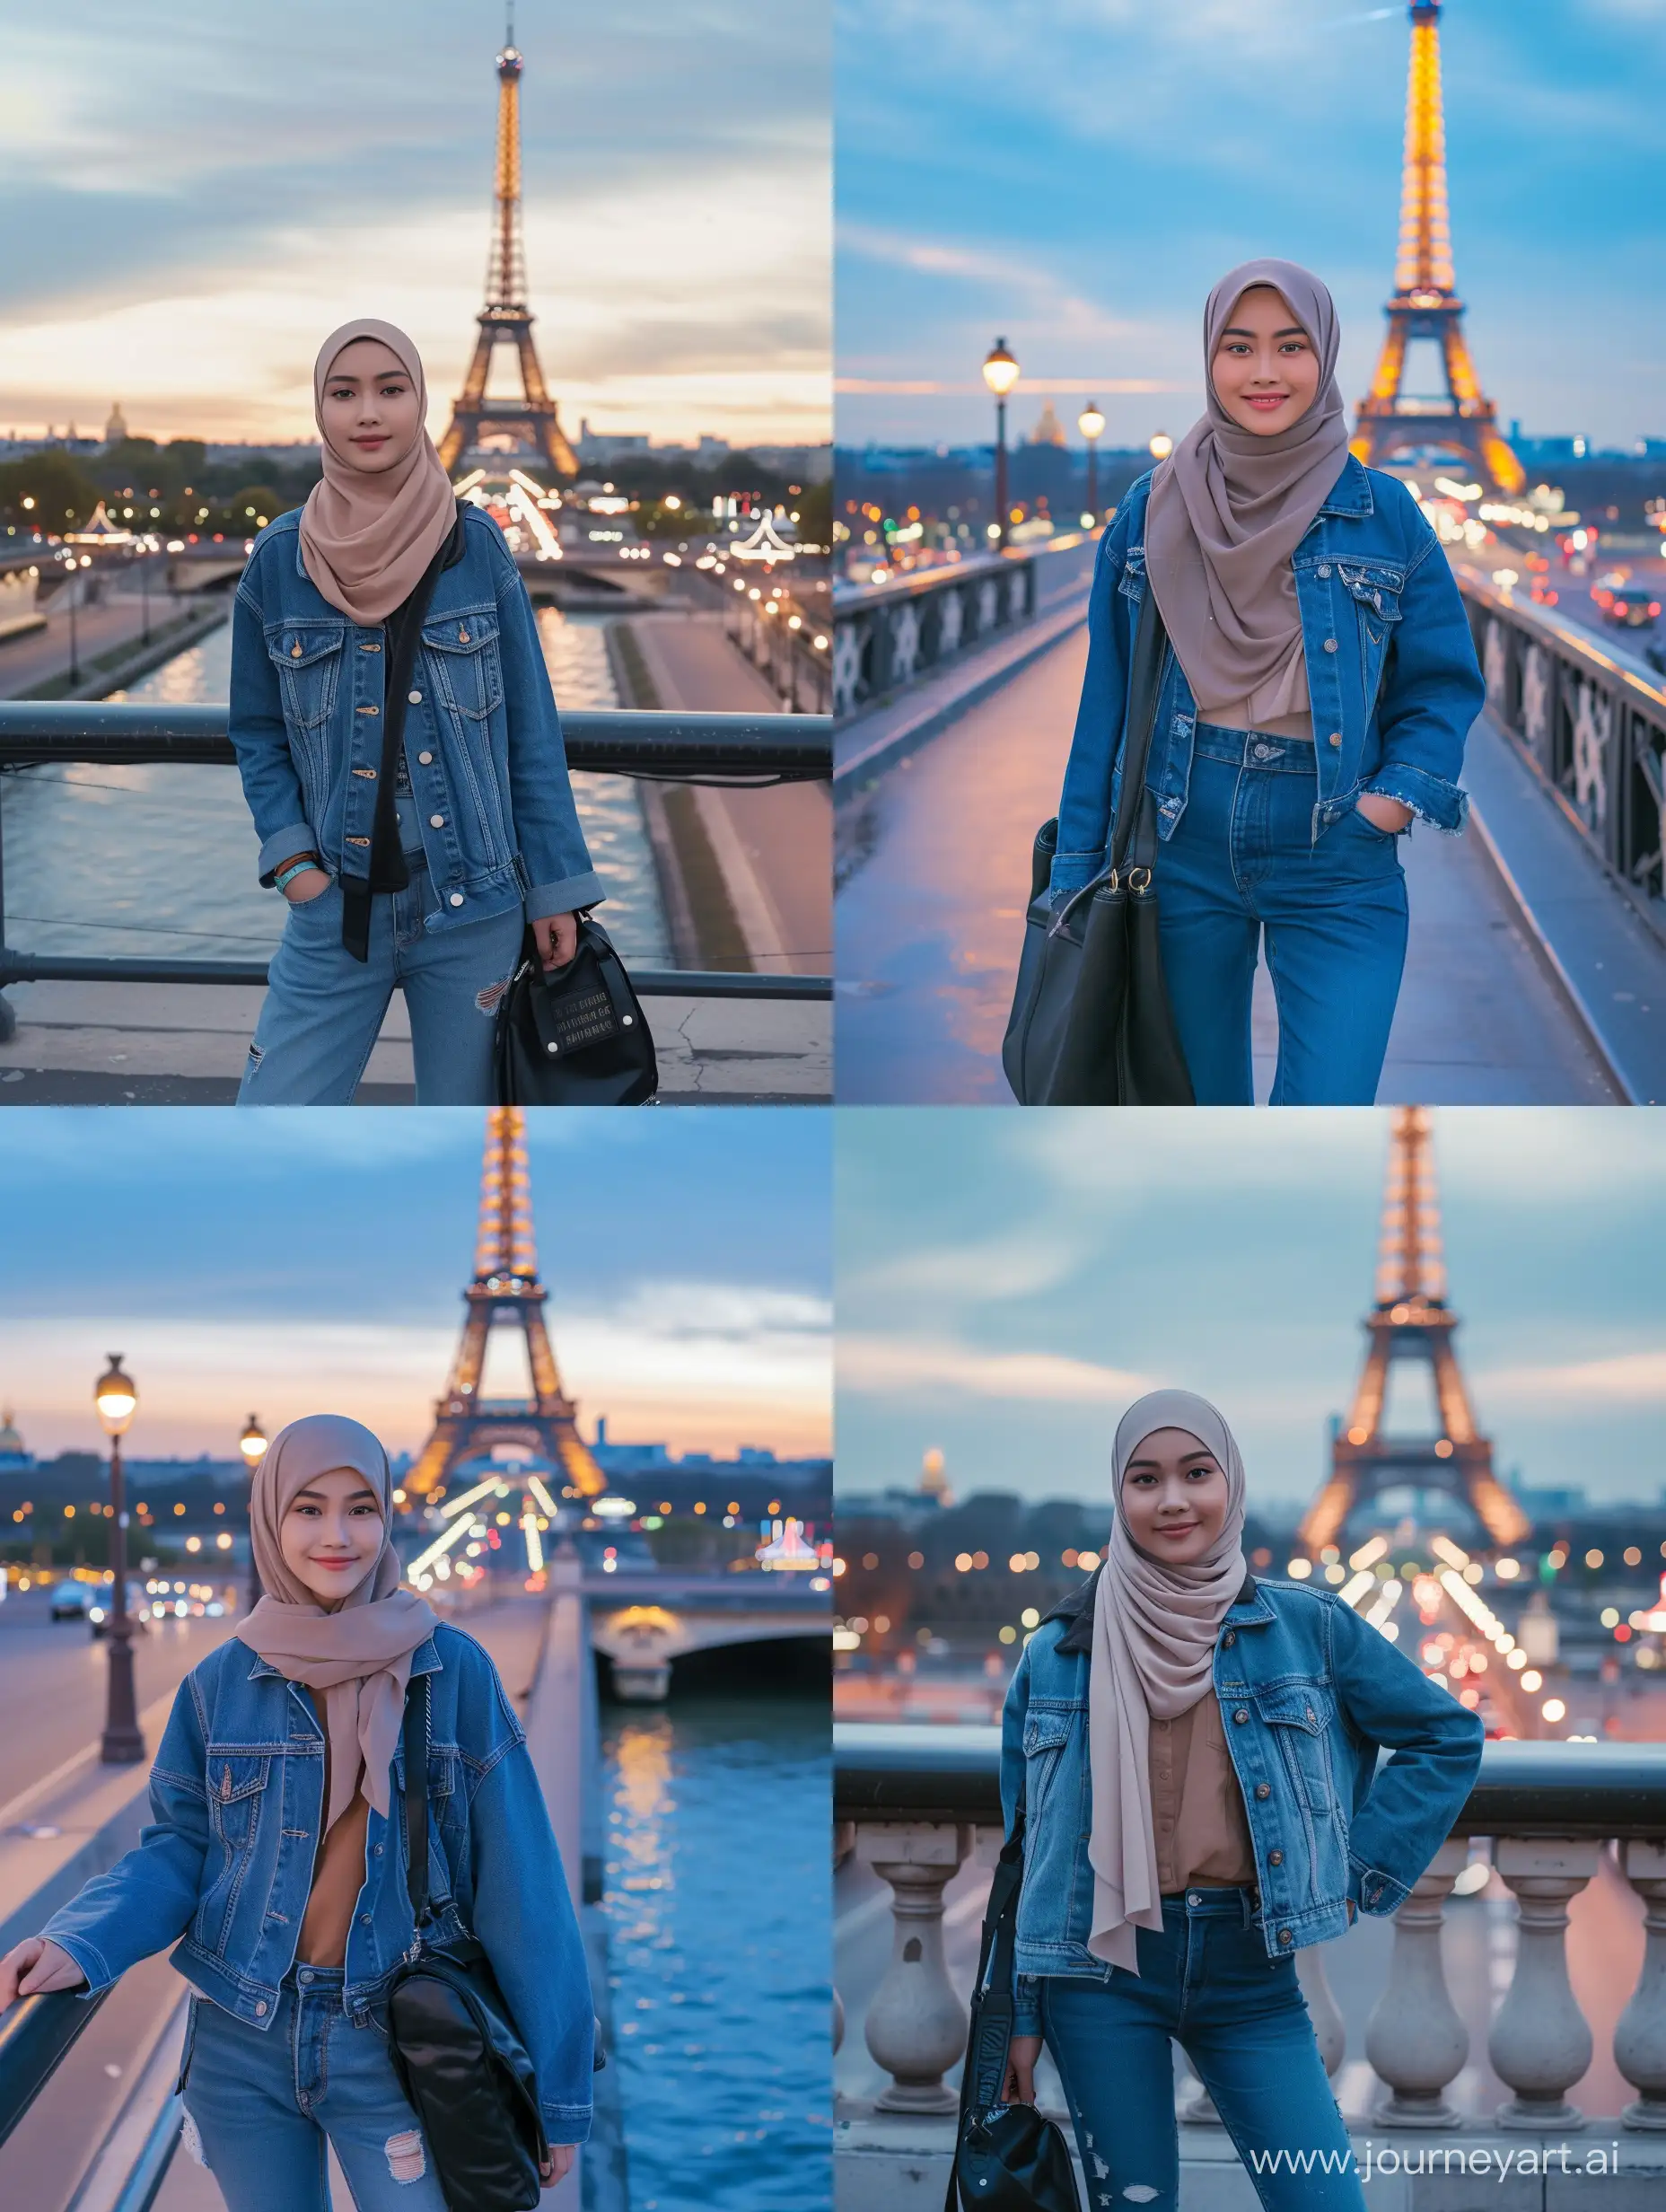 Stylish-Indonesian-Woman-with-Hijab-in-Paris-with-Eiffel-Tower-View